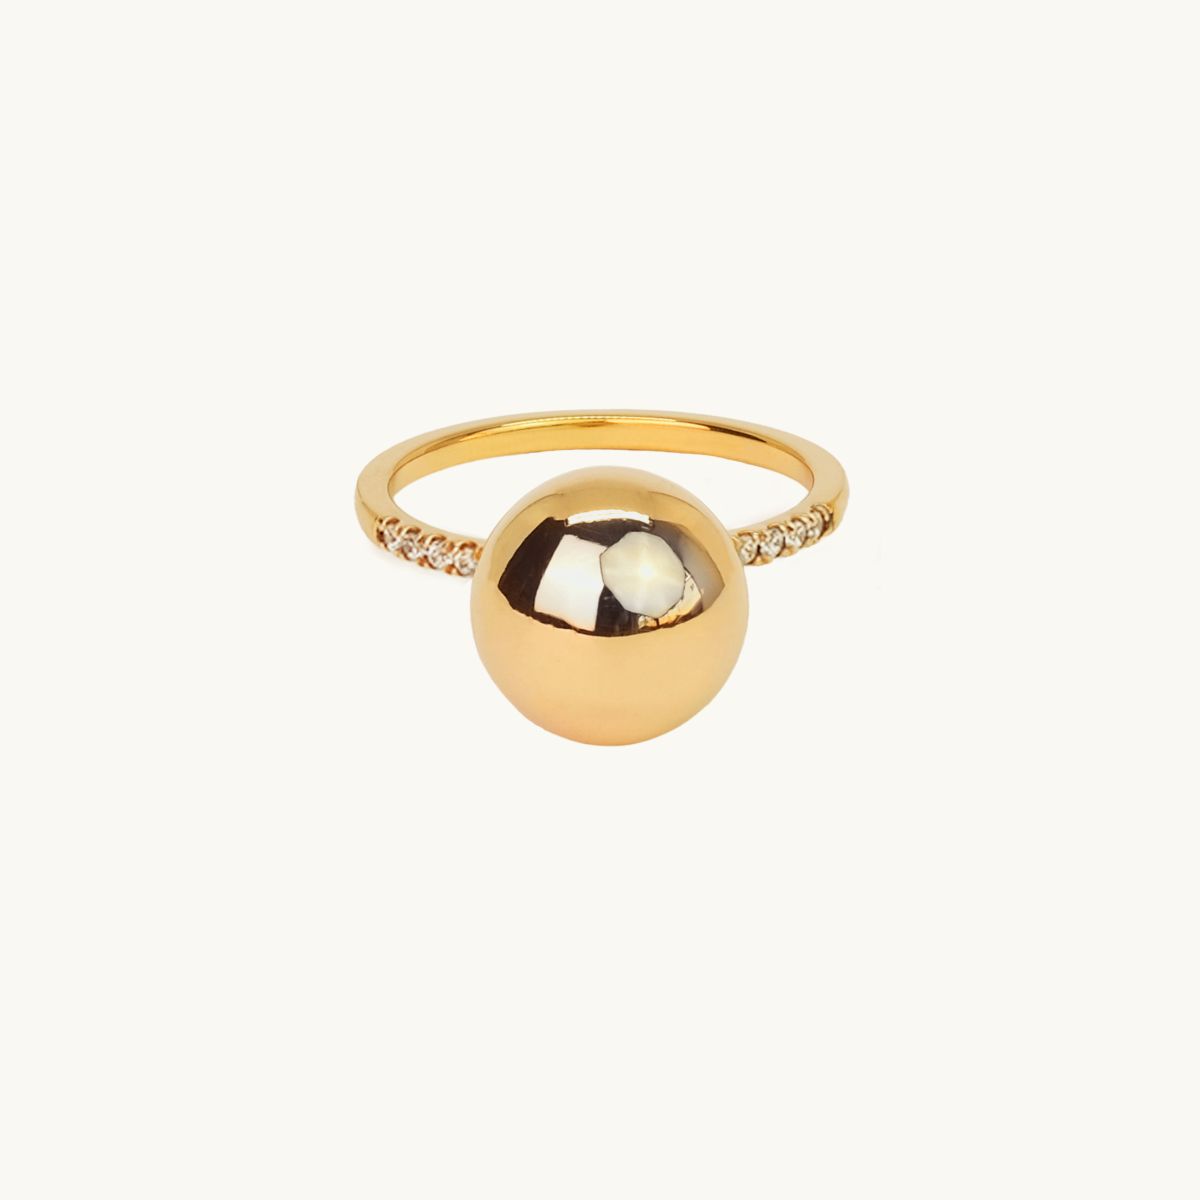 Gold ring with a large globe and white diamonds